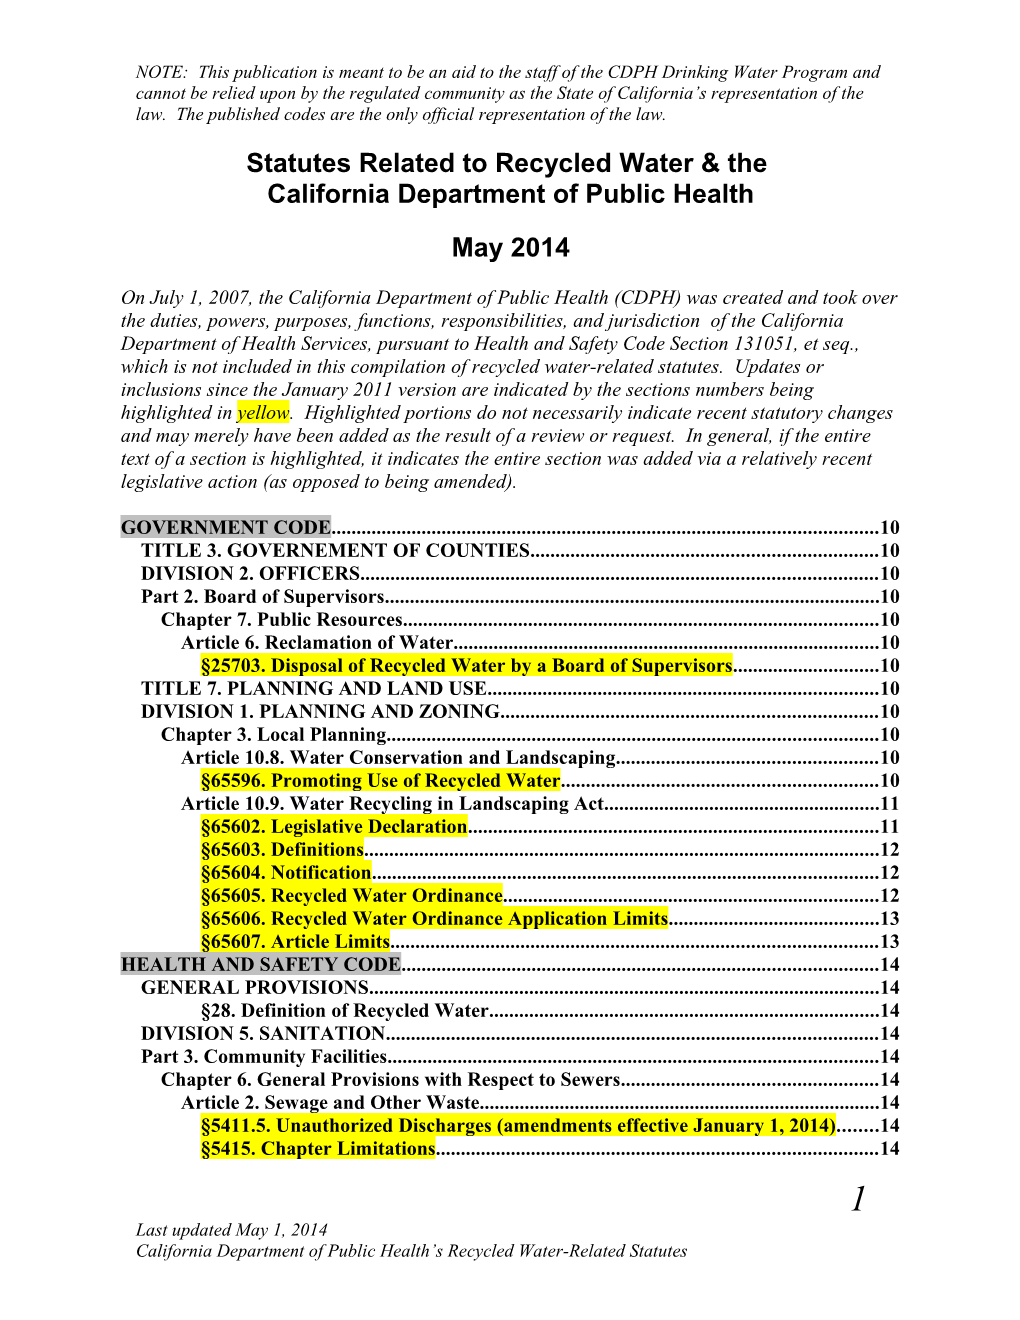 Recycled Water Statutes 2014-05-01A